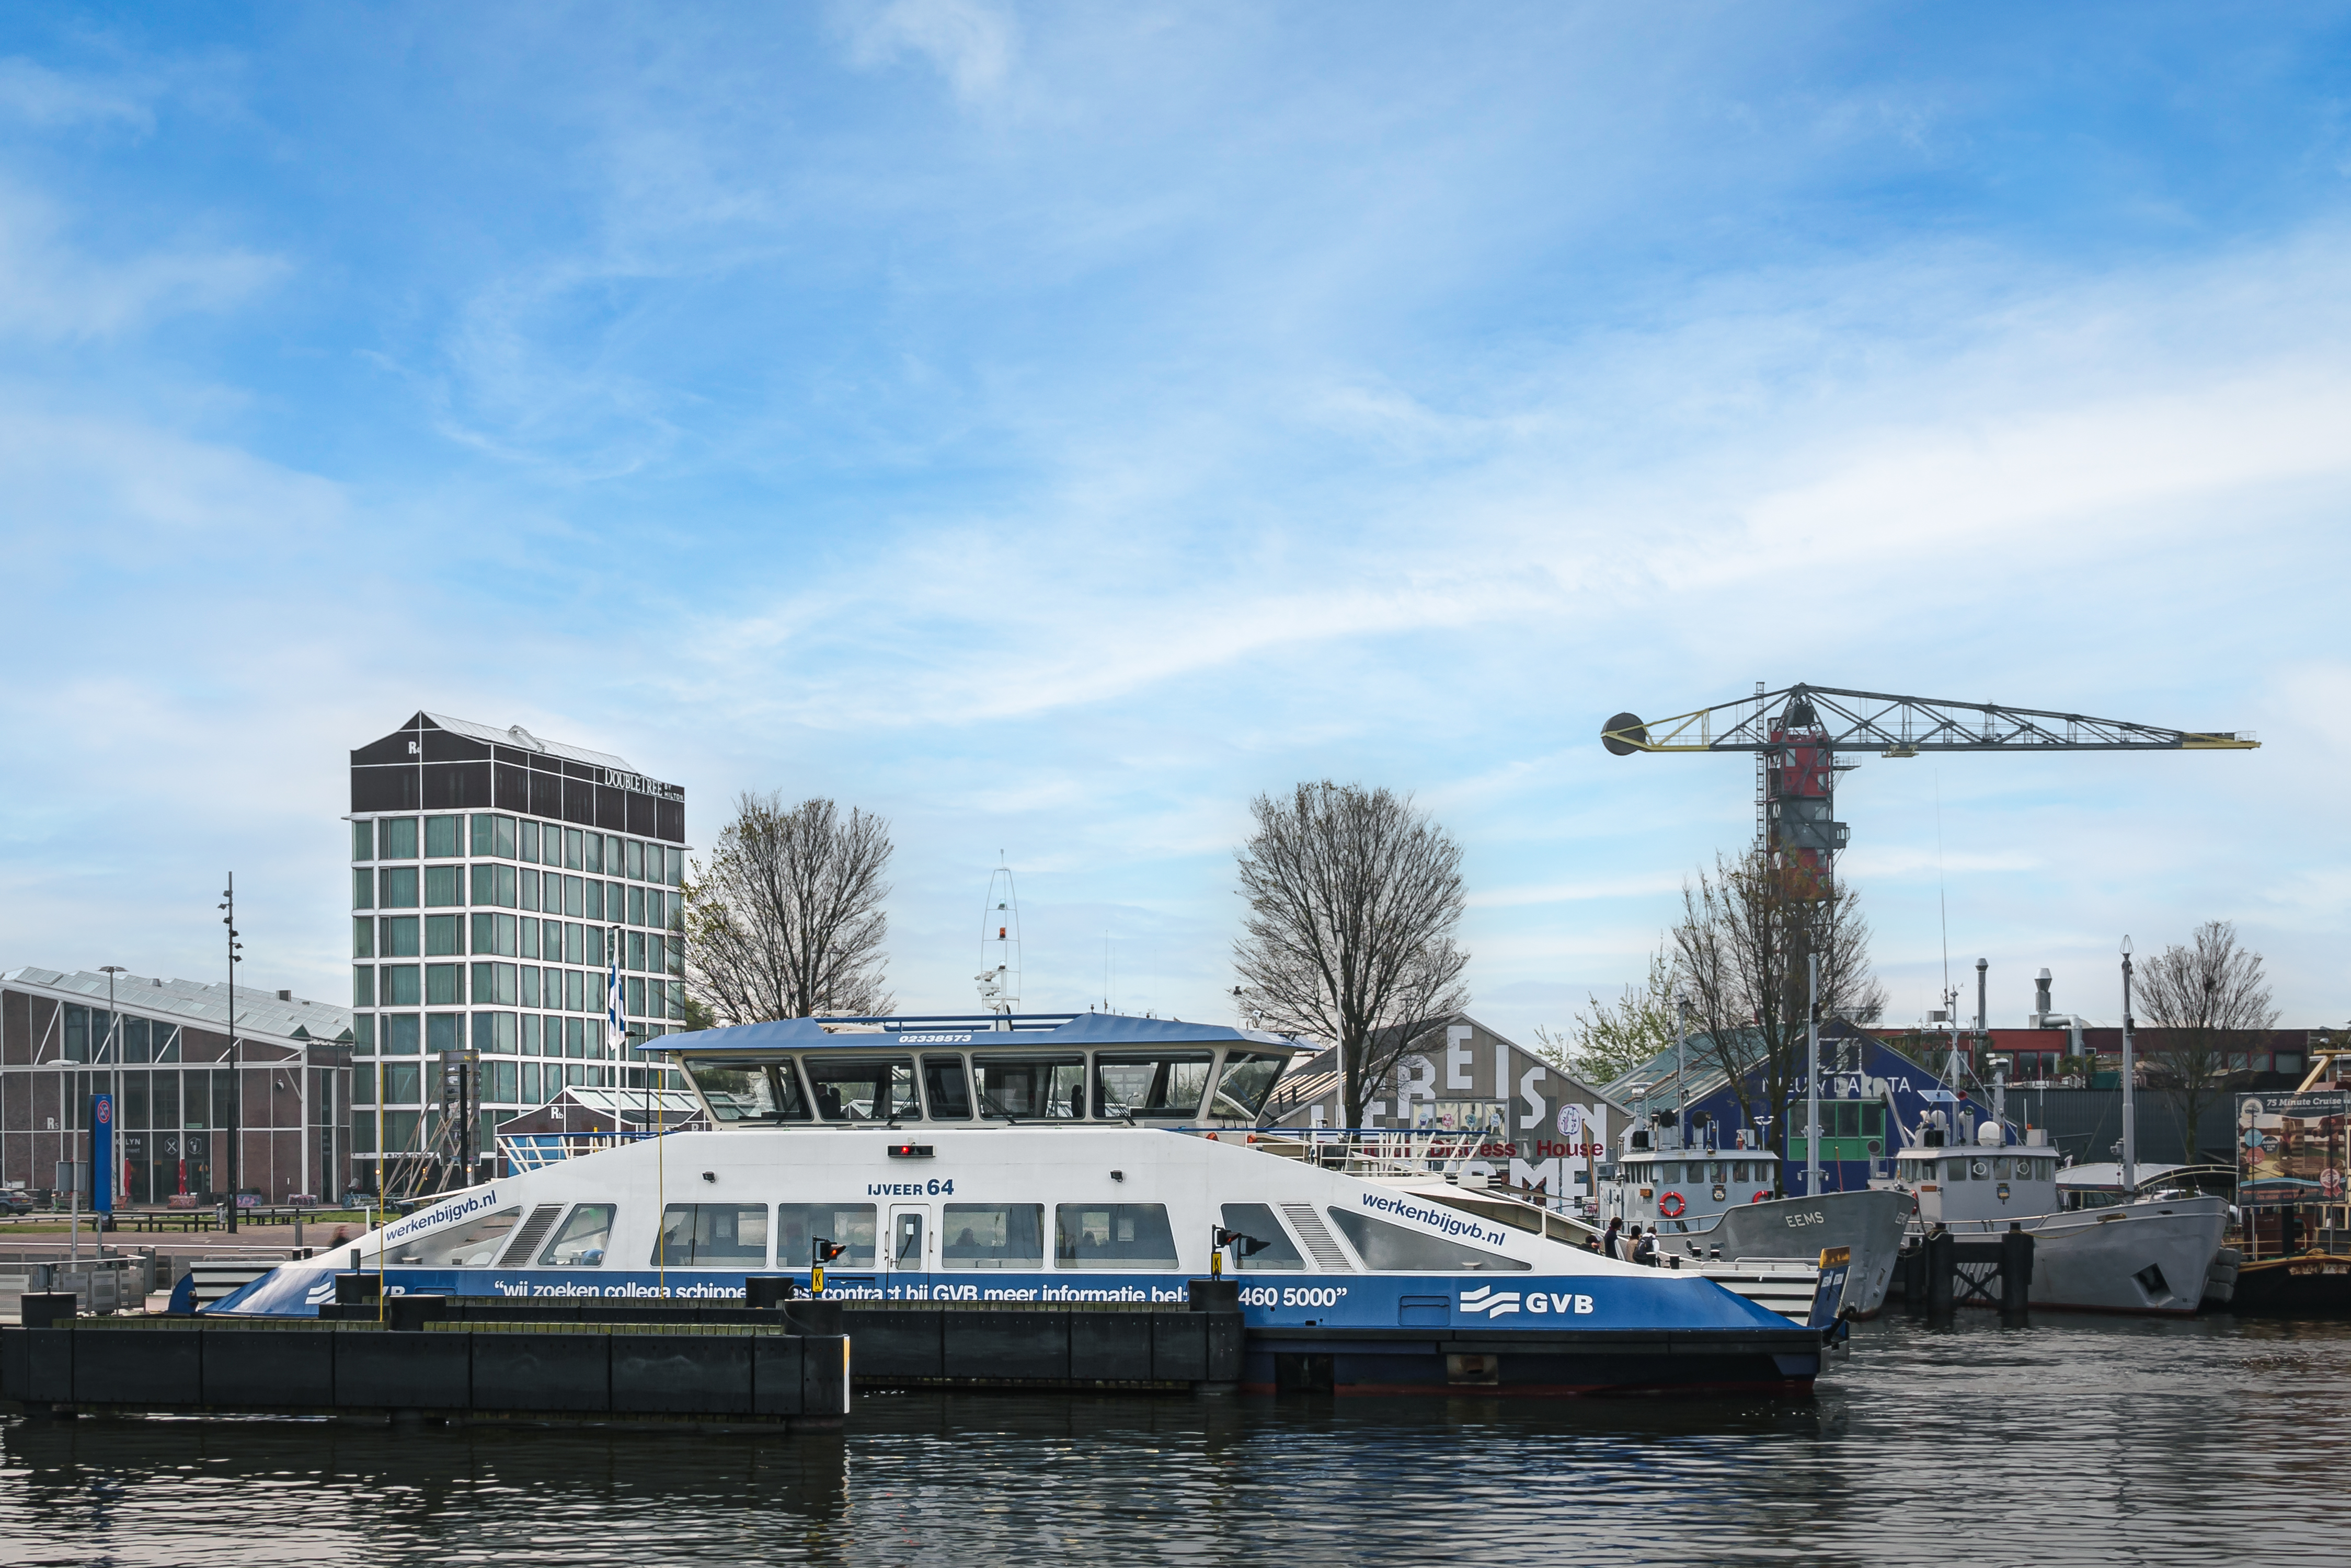 a Boat on the Water and View of DoubleTree Hotel Exterior